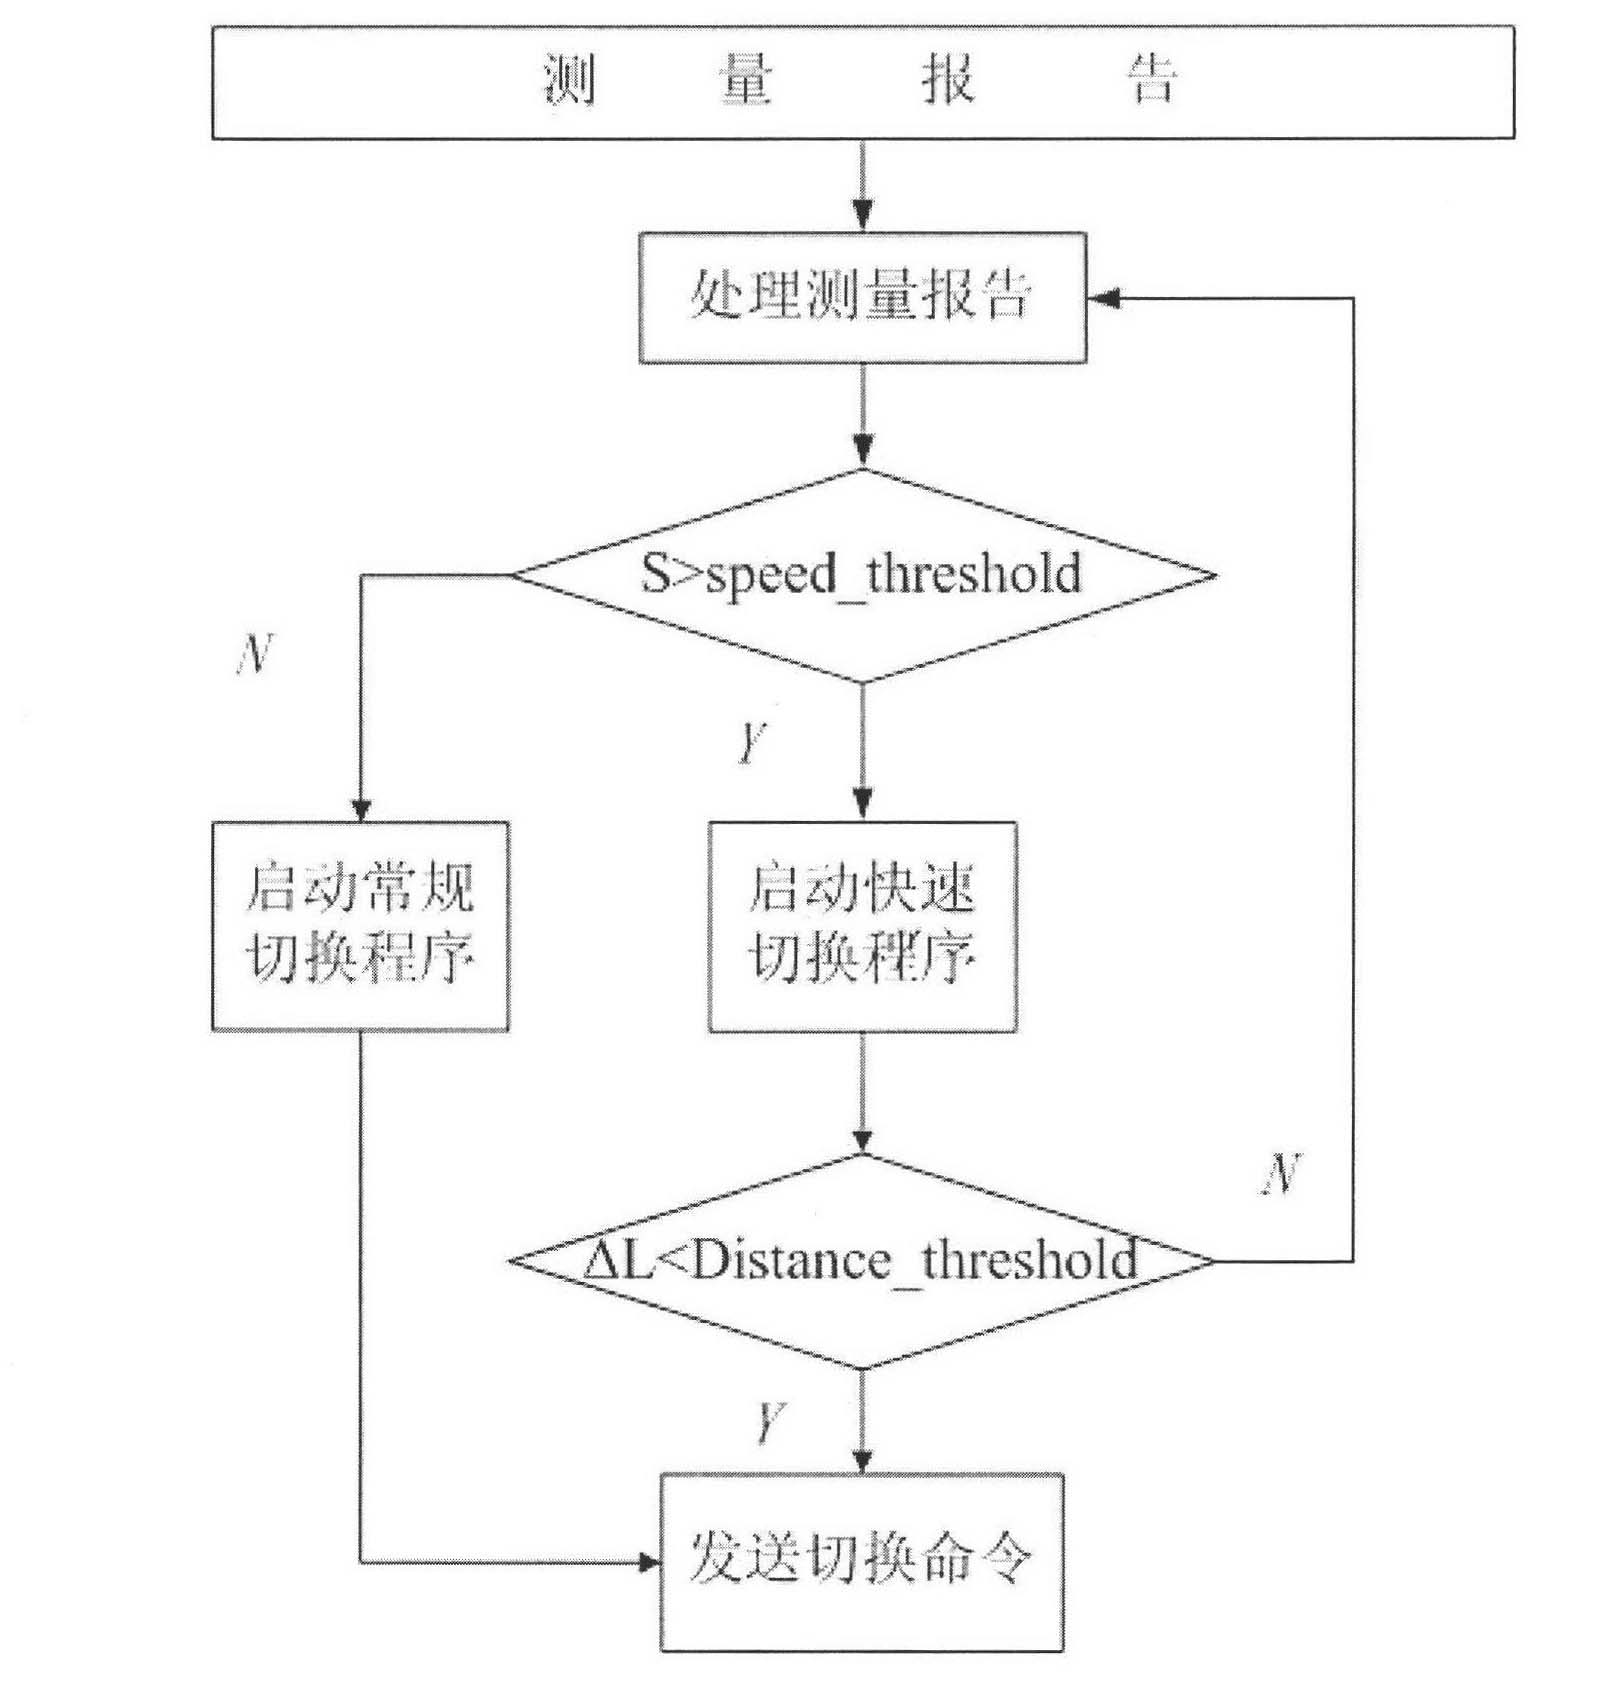 A fast switching method of td-lte communication system based on geographic location information